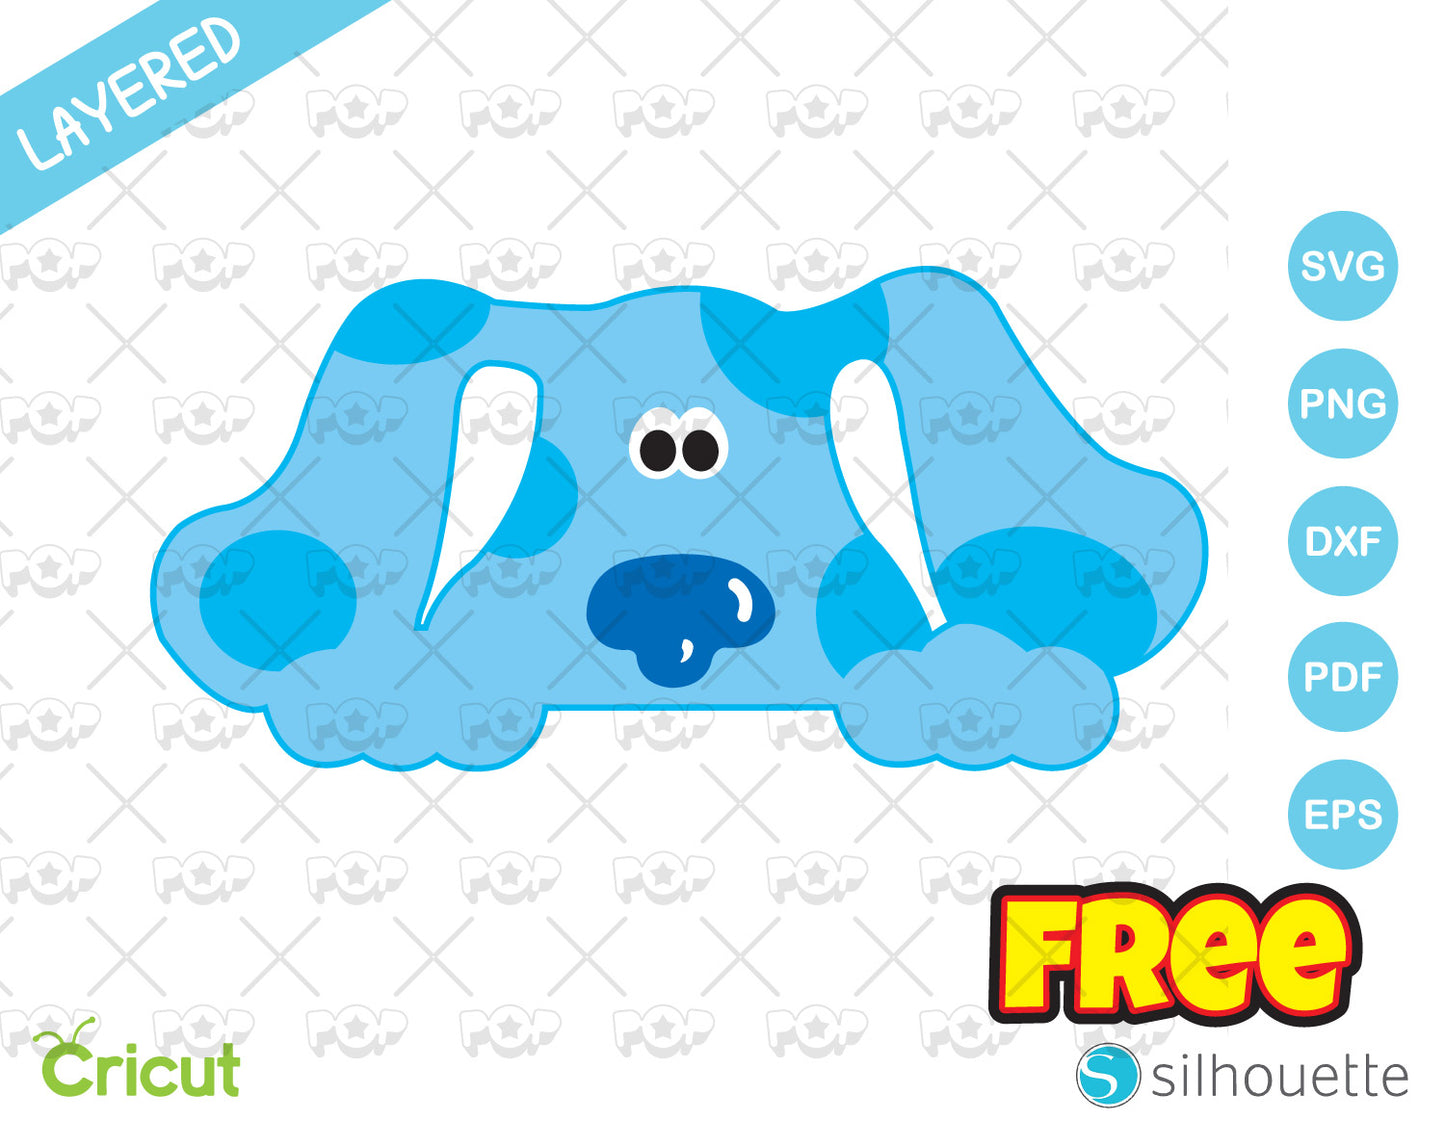 FREE Blue's Clues clipart, SVG cut file for Cricut / Silhouette, SVG PNG DXF, instant download